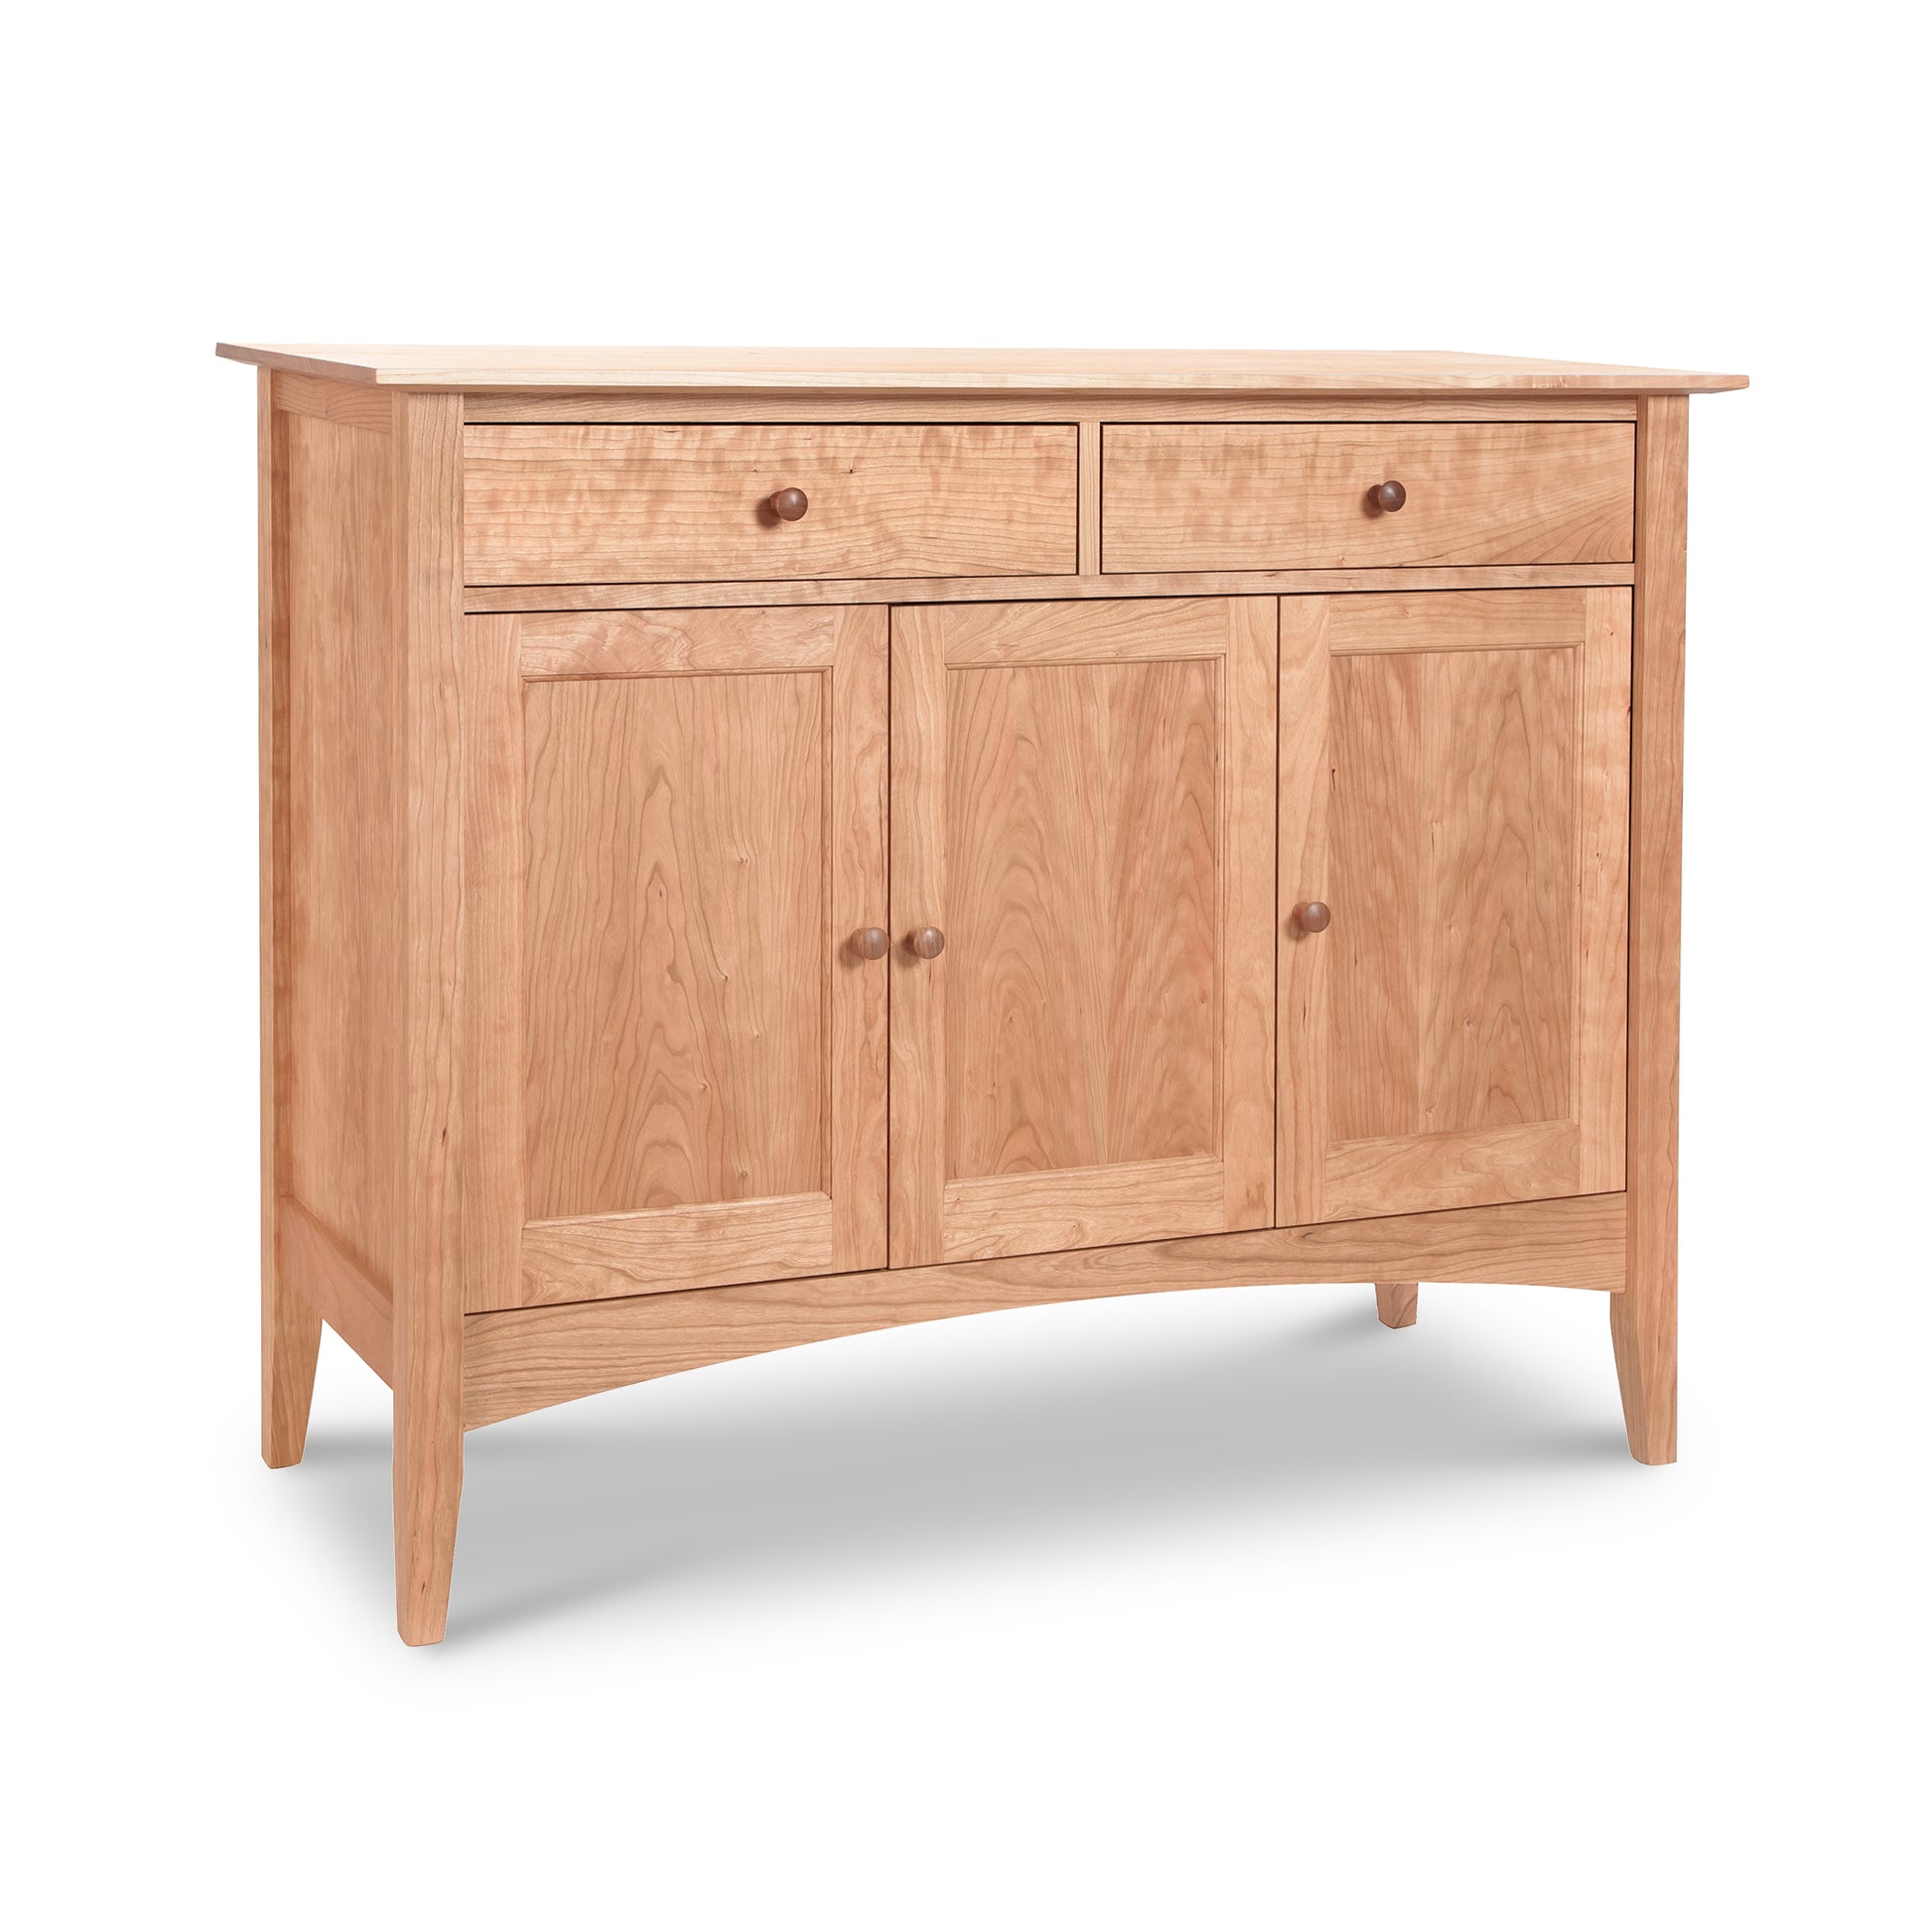 Maple Corner Woodworks American Shaker Sideboard with two drawers and two cabinet doors on a white background.